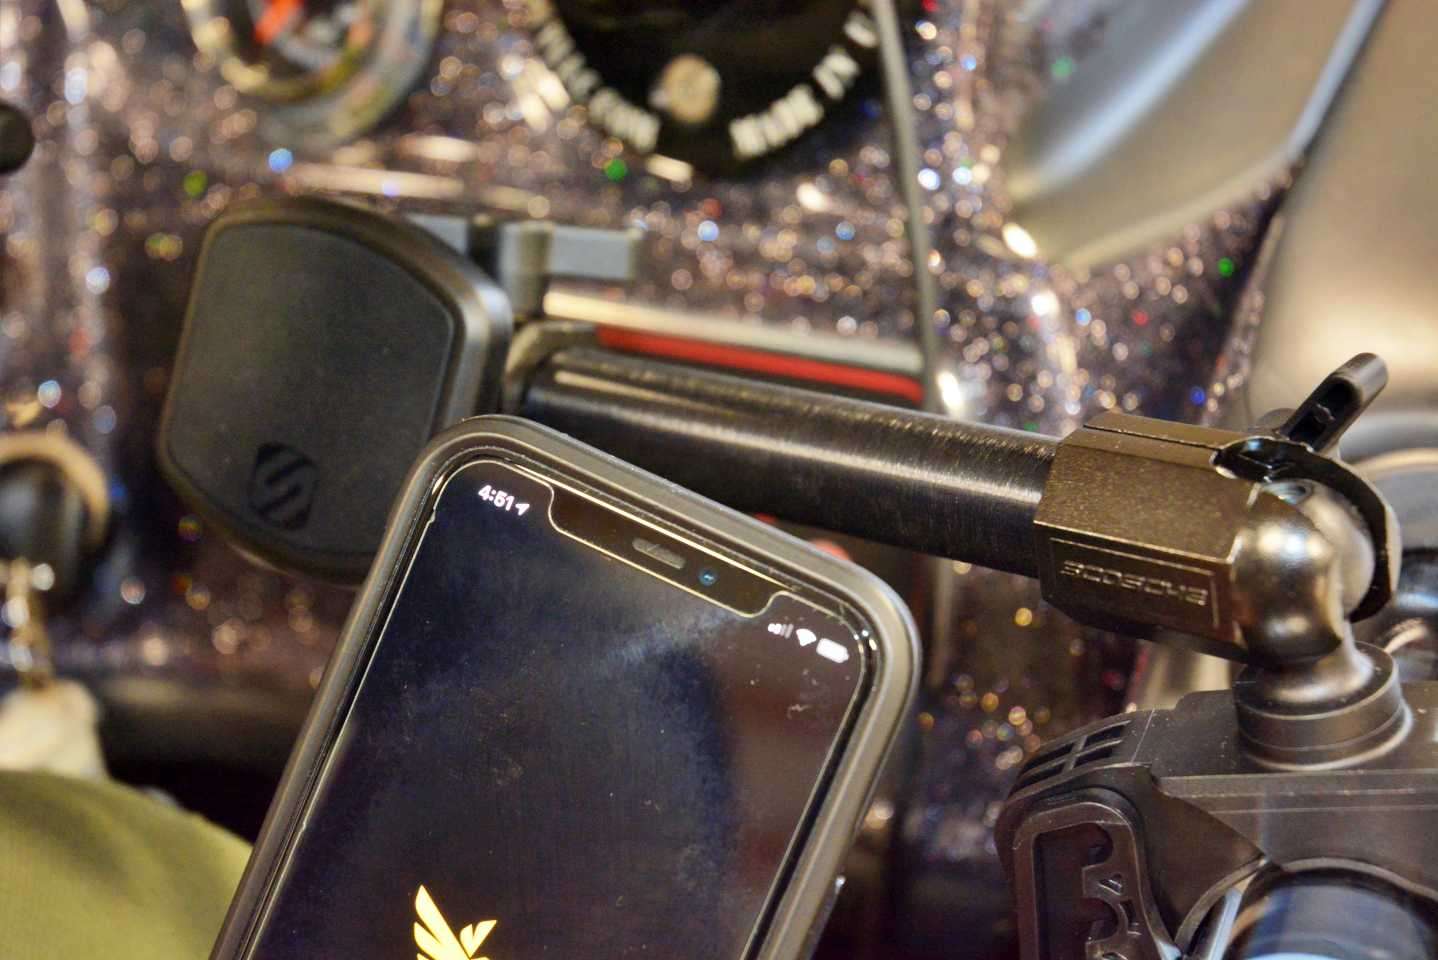 The Scosche MagicMount clamps on the rail near the helm to secure Carlâs smartphone. 